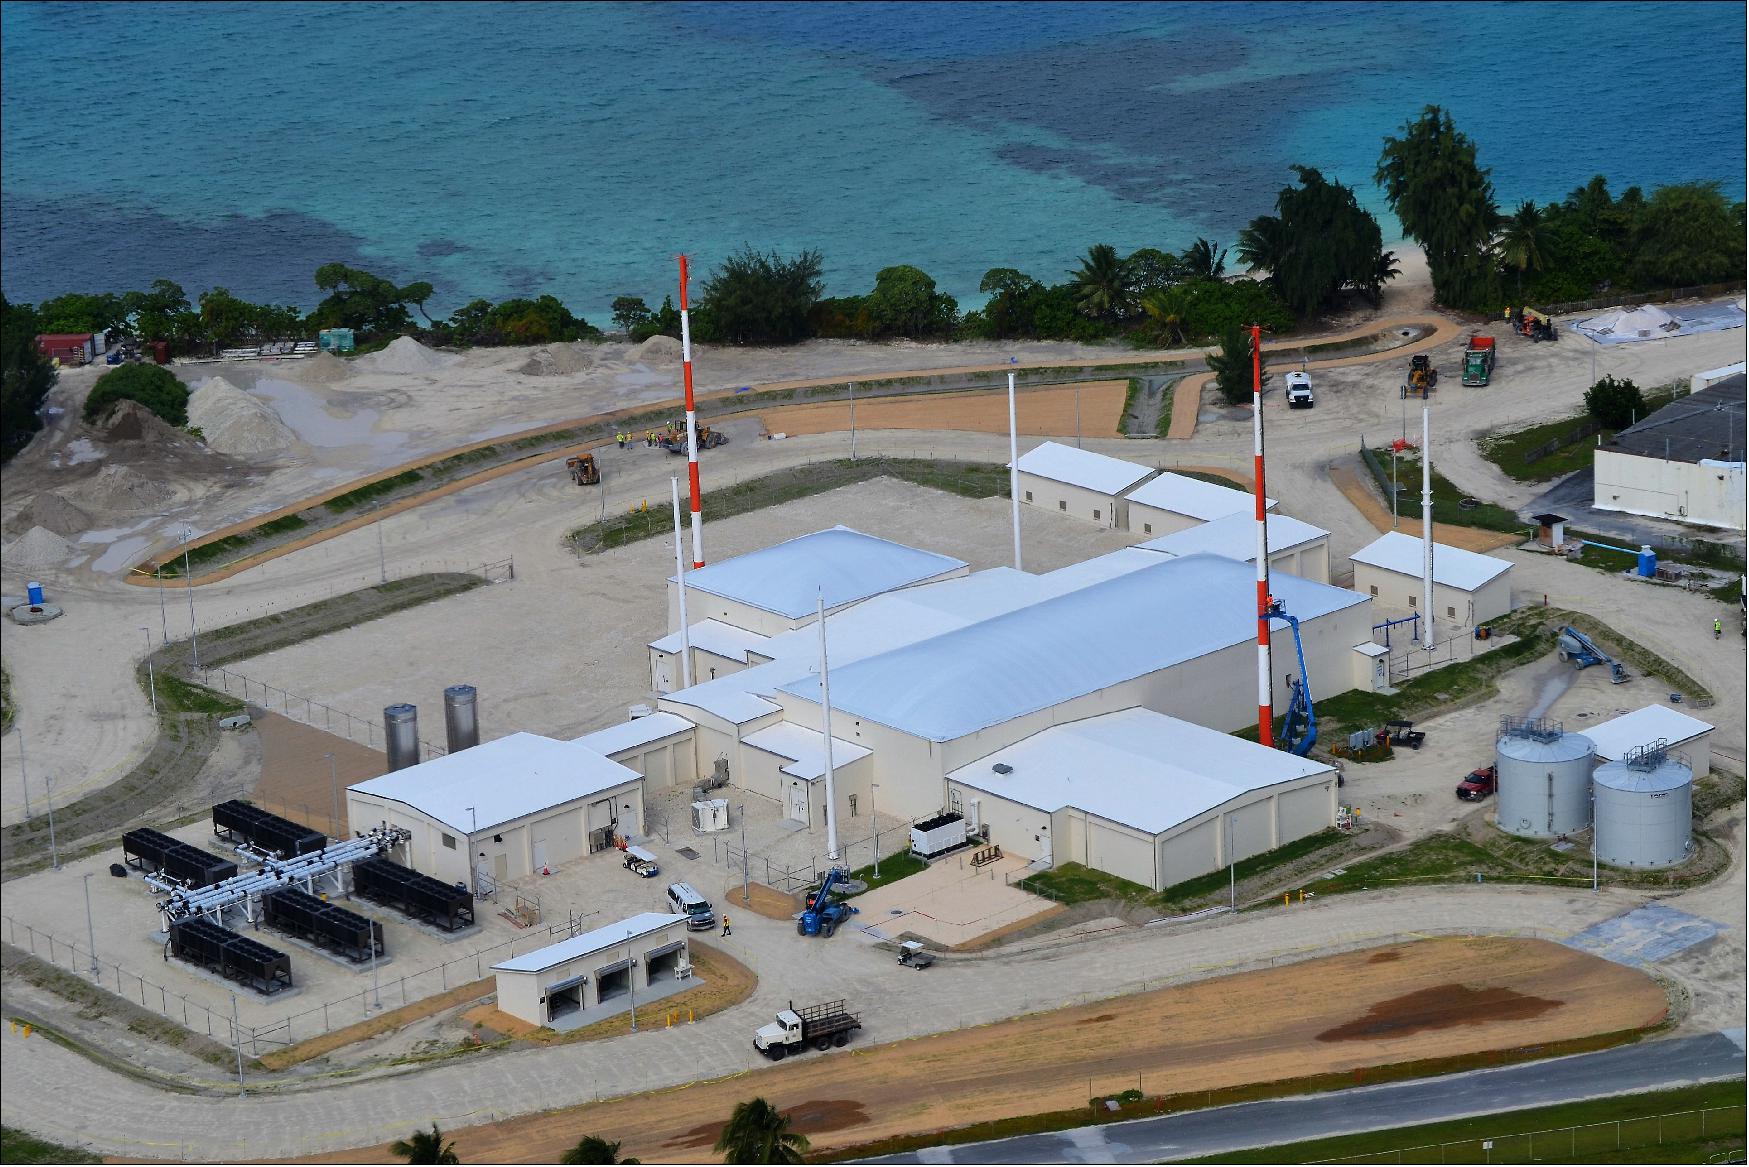 Figure 16: An Aerial view of the Space Fence facility located on Kwajalein Atoll (photo credit: Lockheed Martin)